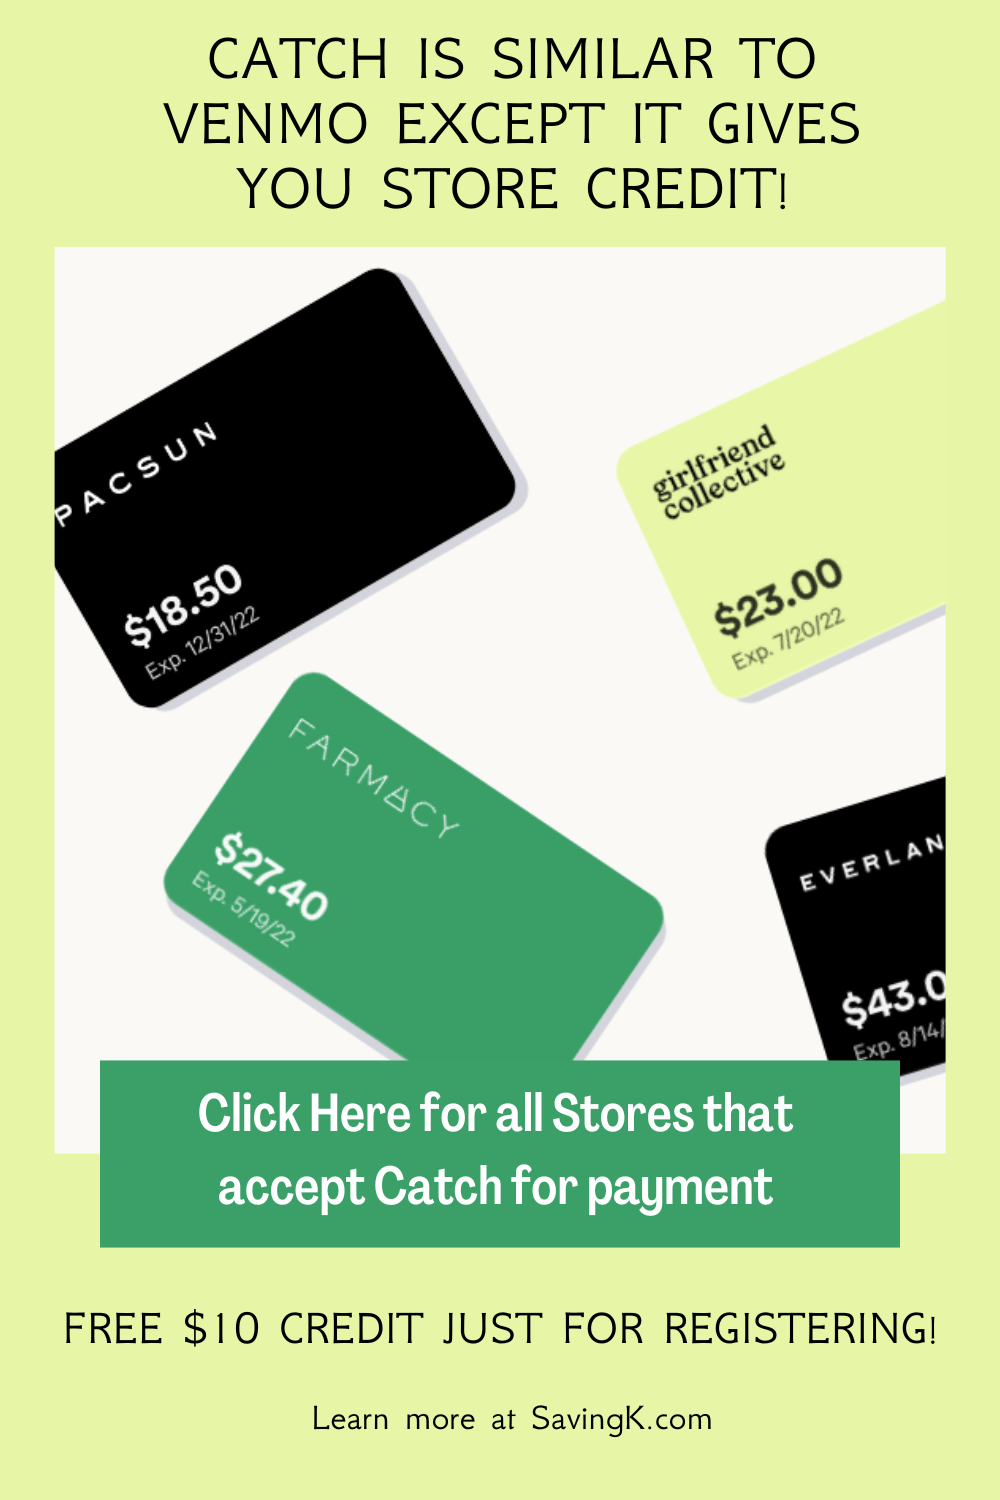 Click Here for all Stores that accept Catch for payment